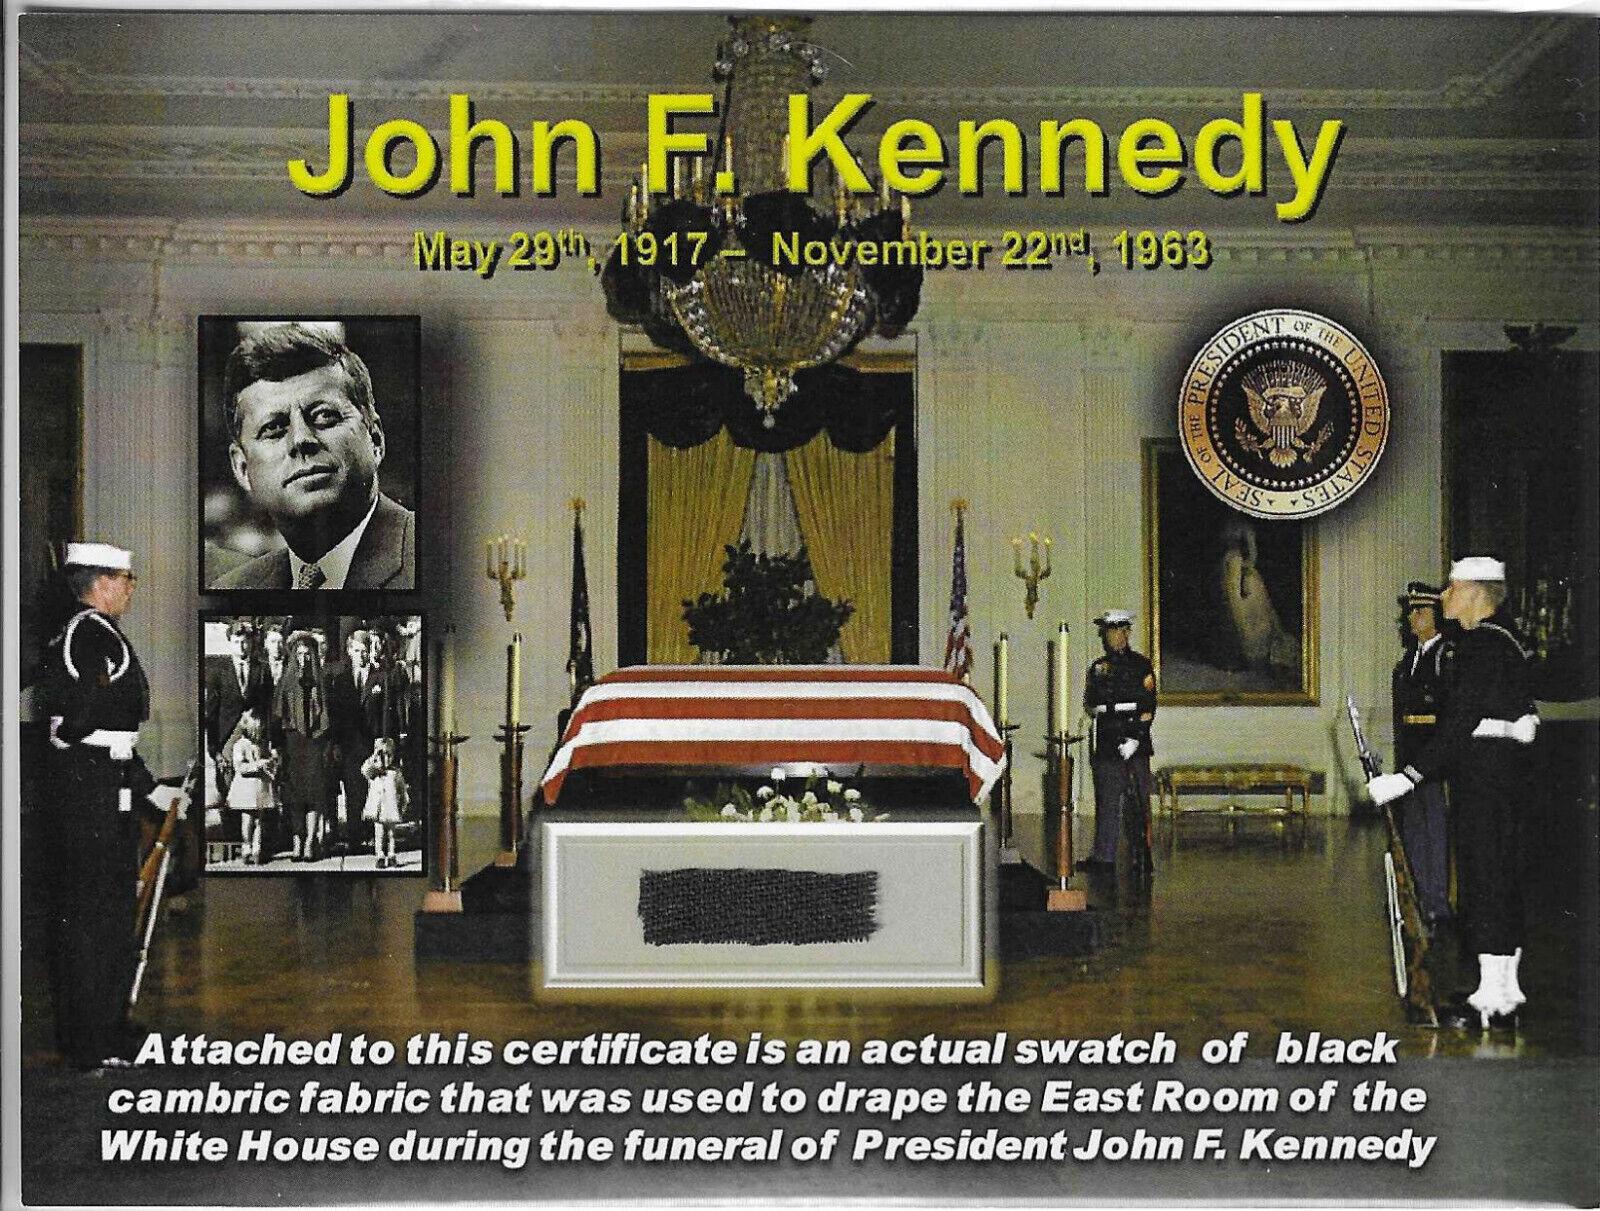 Genuine Piece of Black Fabric Used During the Funeral of John F. Kennedy